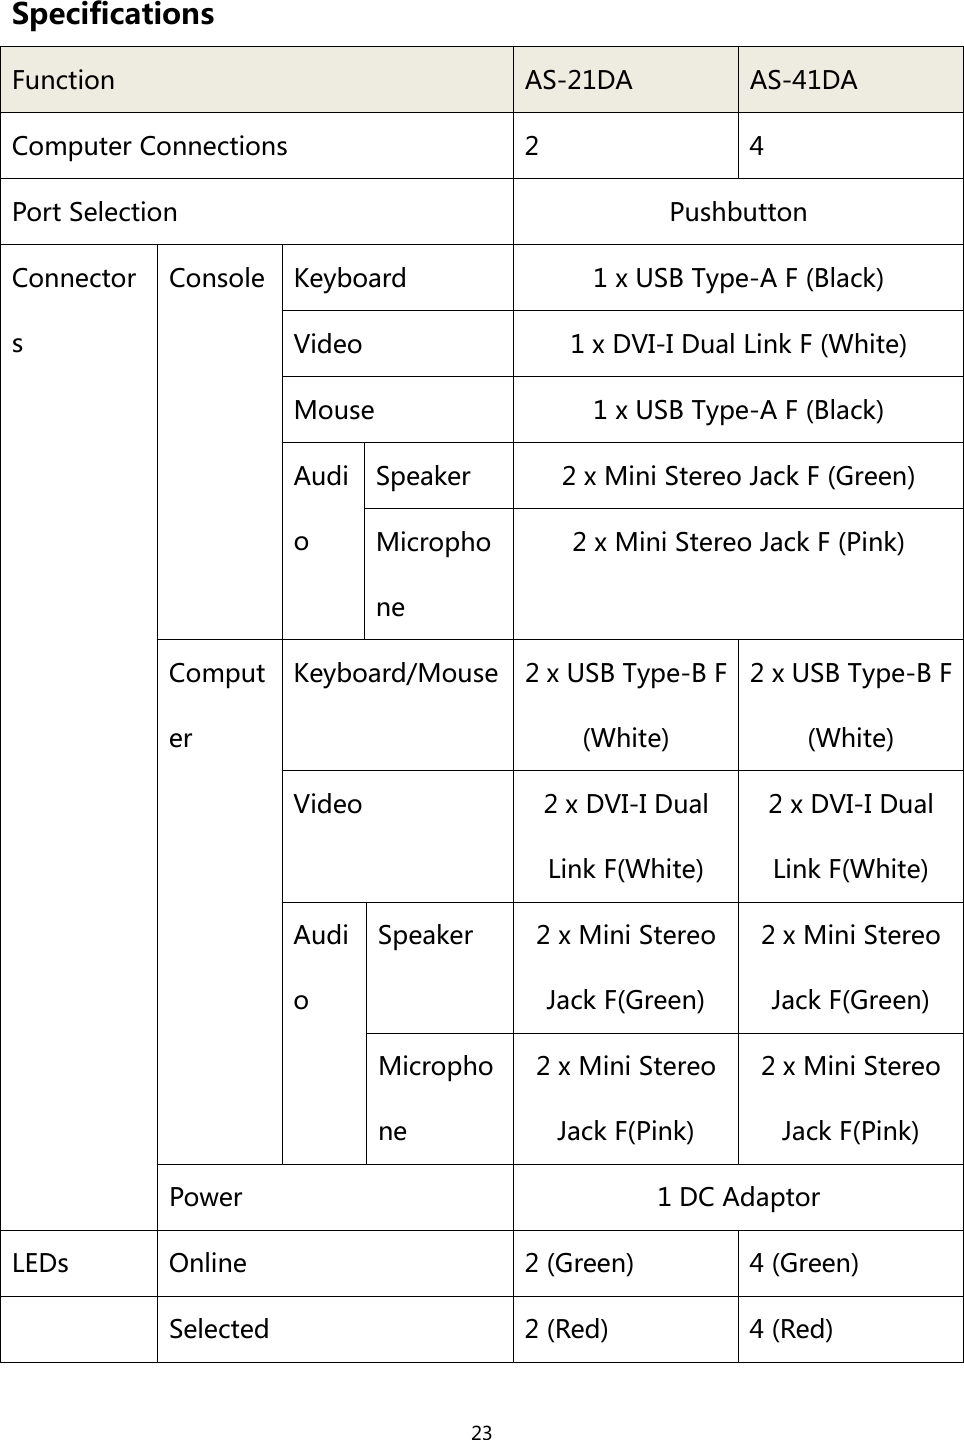 23SpecificationsFunction AS-21DA AS-41DAComputer Connections 2 4Port Selection PushbuttonConnectorsConsole Keyboard 1 x USB Type-A F (Black)Video 1 x DVI-I Dual Link F (White)Mouse 1 x USB Type-A F (Black)AudioSpeaker 2 x Mini Stereo Jack F (Green)Microphone2 x Mini Stereo Jack F (Pink)ComputerKeyboard/Mouse 2 x USB Type-B F(White)2xUSBType-BF(White)Video 2 x DVI-I DualLink F(White)2xDVI-IDualLink F(White)AudioSpeaker 2 x Mini StereoJack F(Green)2 x Mini StereoJack F(Green)Microphone2 x Mini StereoJack F(Pink)2 x Mini StereoJack F(Pink)Power 1 DC AdaptorLEDs Online 2 (Green) 4 (Green)Selected 2 (Red) 4 (Red)